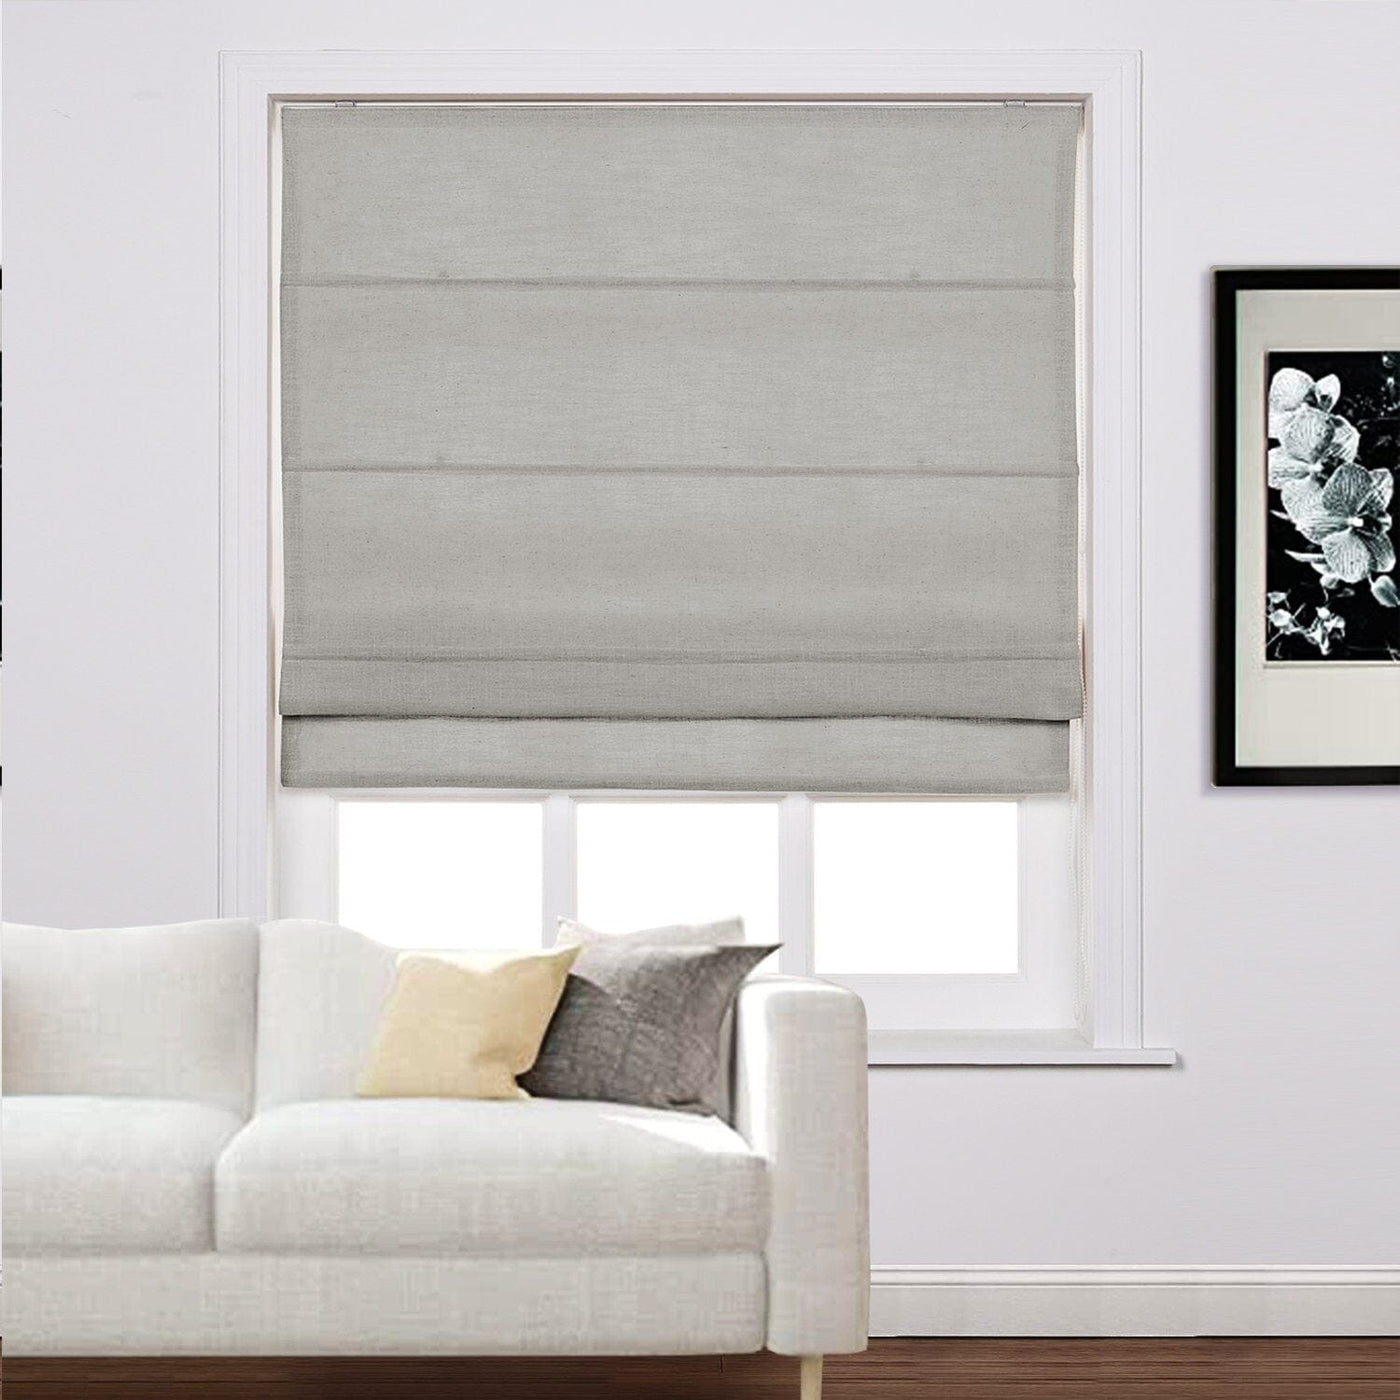 LIZ Linen Customized Roman Shade, Canvas Roman Shade with Loop Control, Kitchen Window Door Roman Shade, Install Hardware Included TWOPAGES CURTAINS Rock Grey 1908-12 